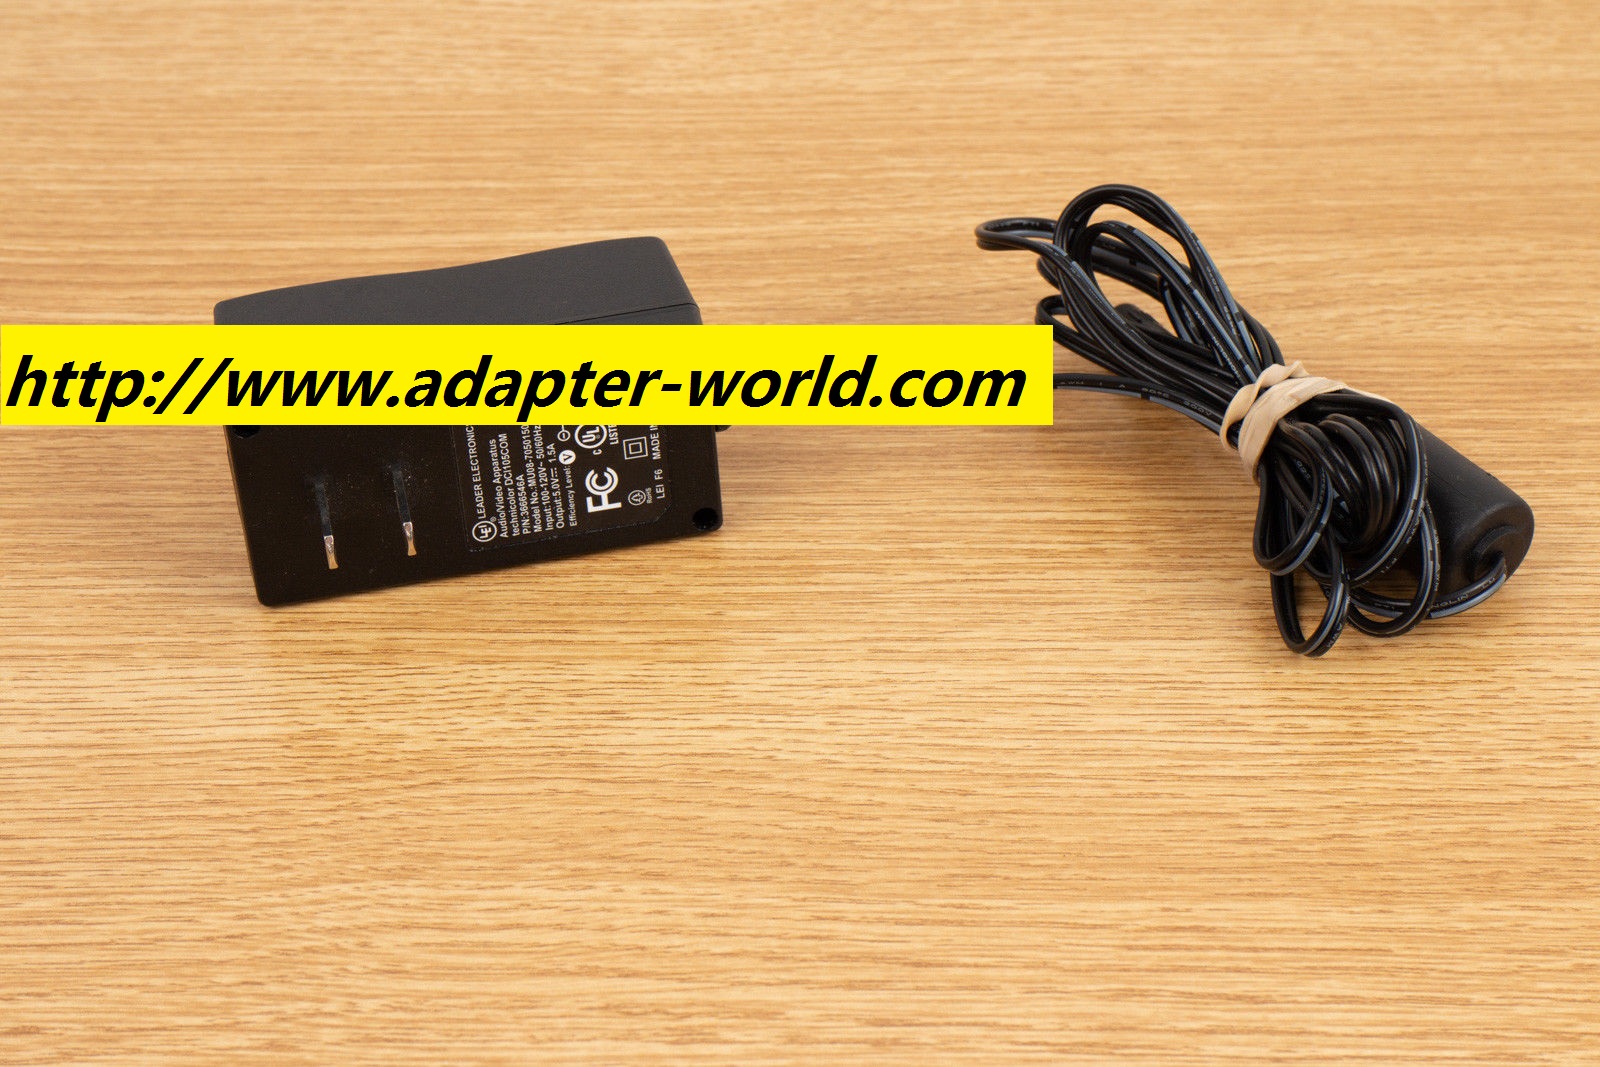 100% Brand NEW LEI Leader MU08-7050150-A1 3666546B 12V 750mA AC to DC Power Supply Adapter POWER SUPPLY Free S